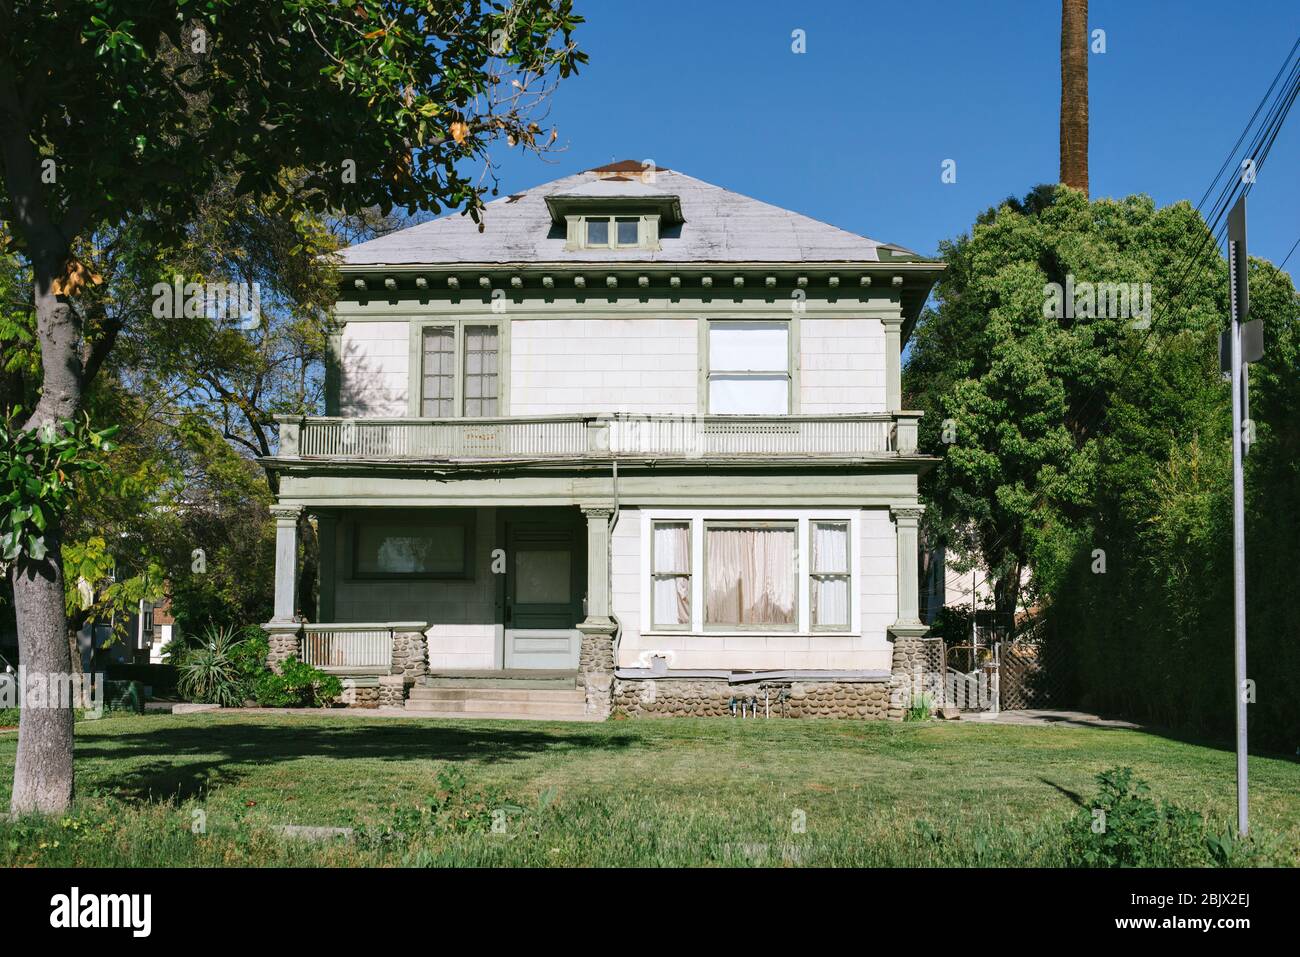 Old decrepit home in need of repair - Scary abandoned house - Fixer Upper in Need of Repairs Stock Photo